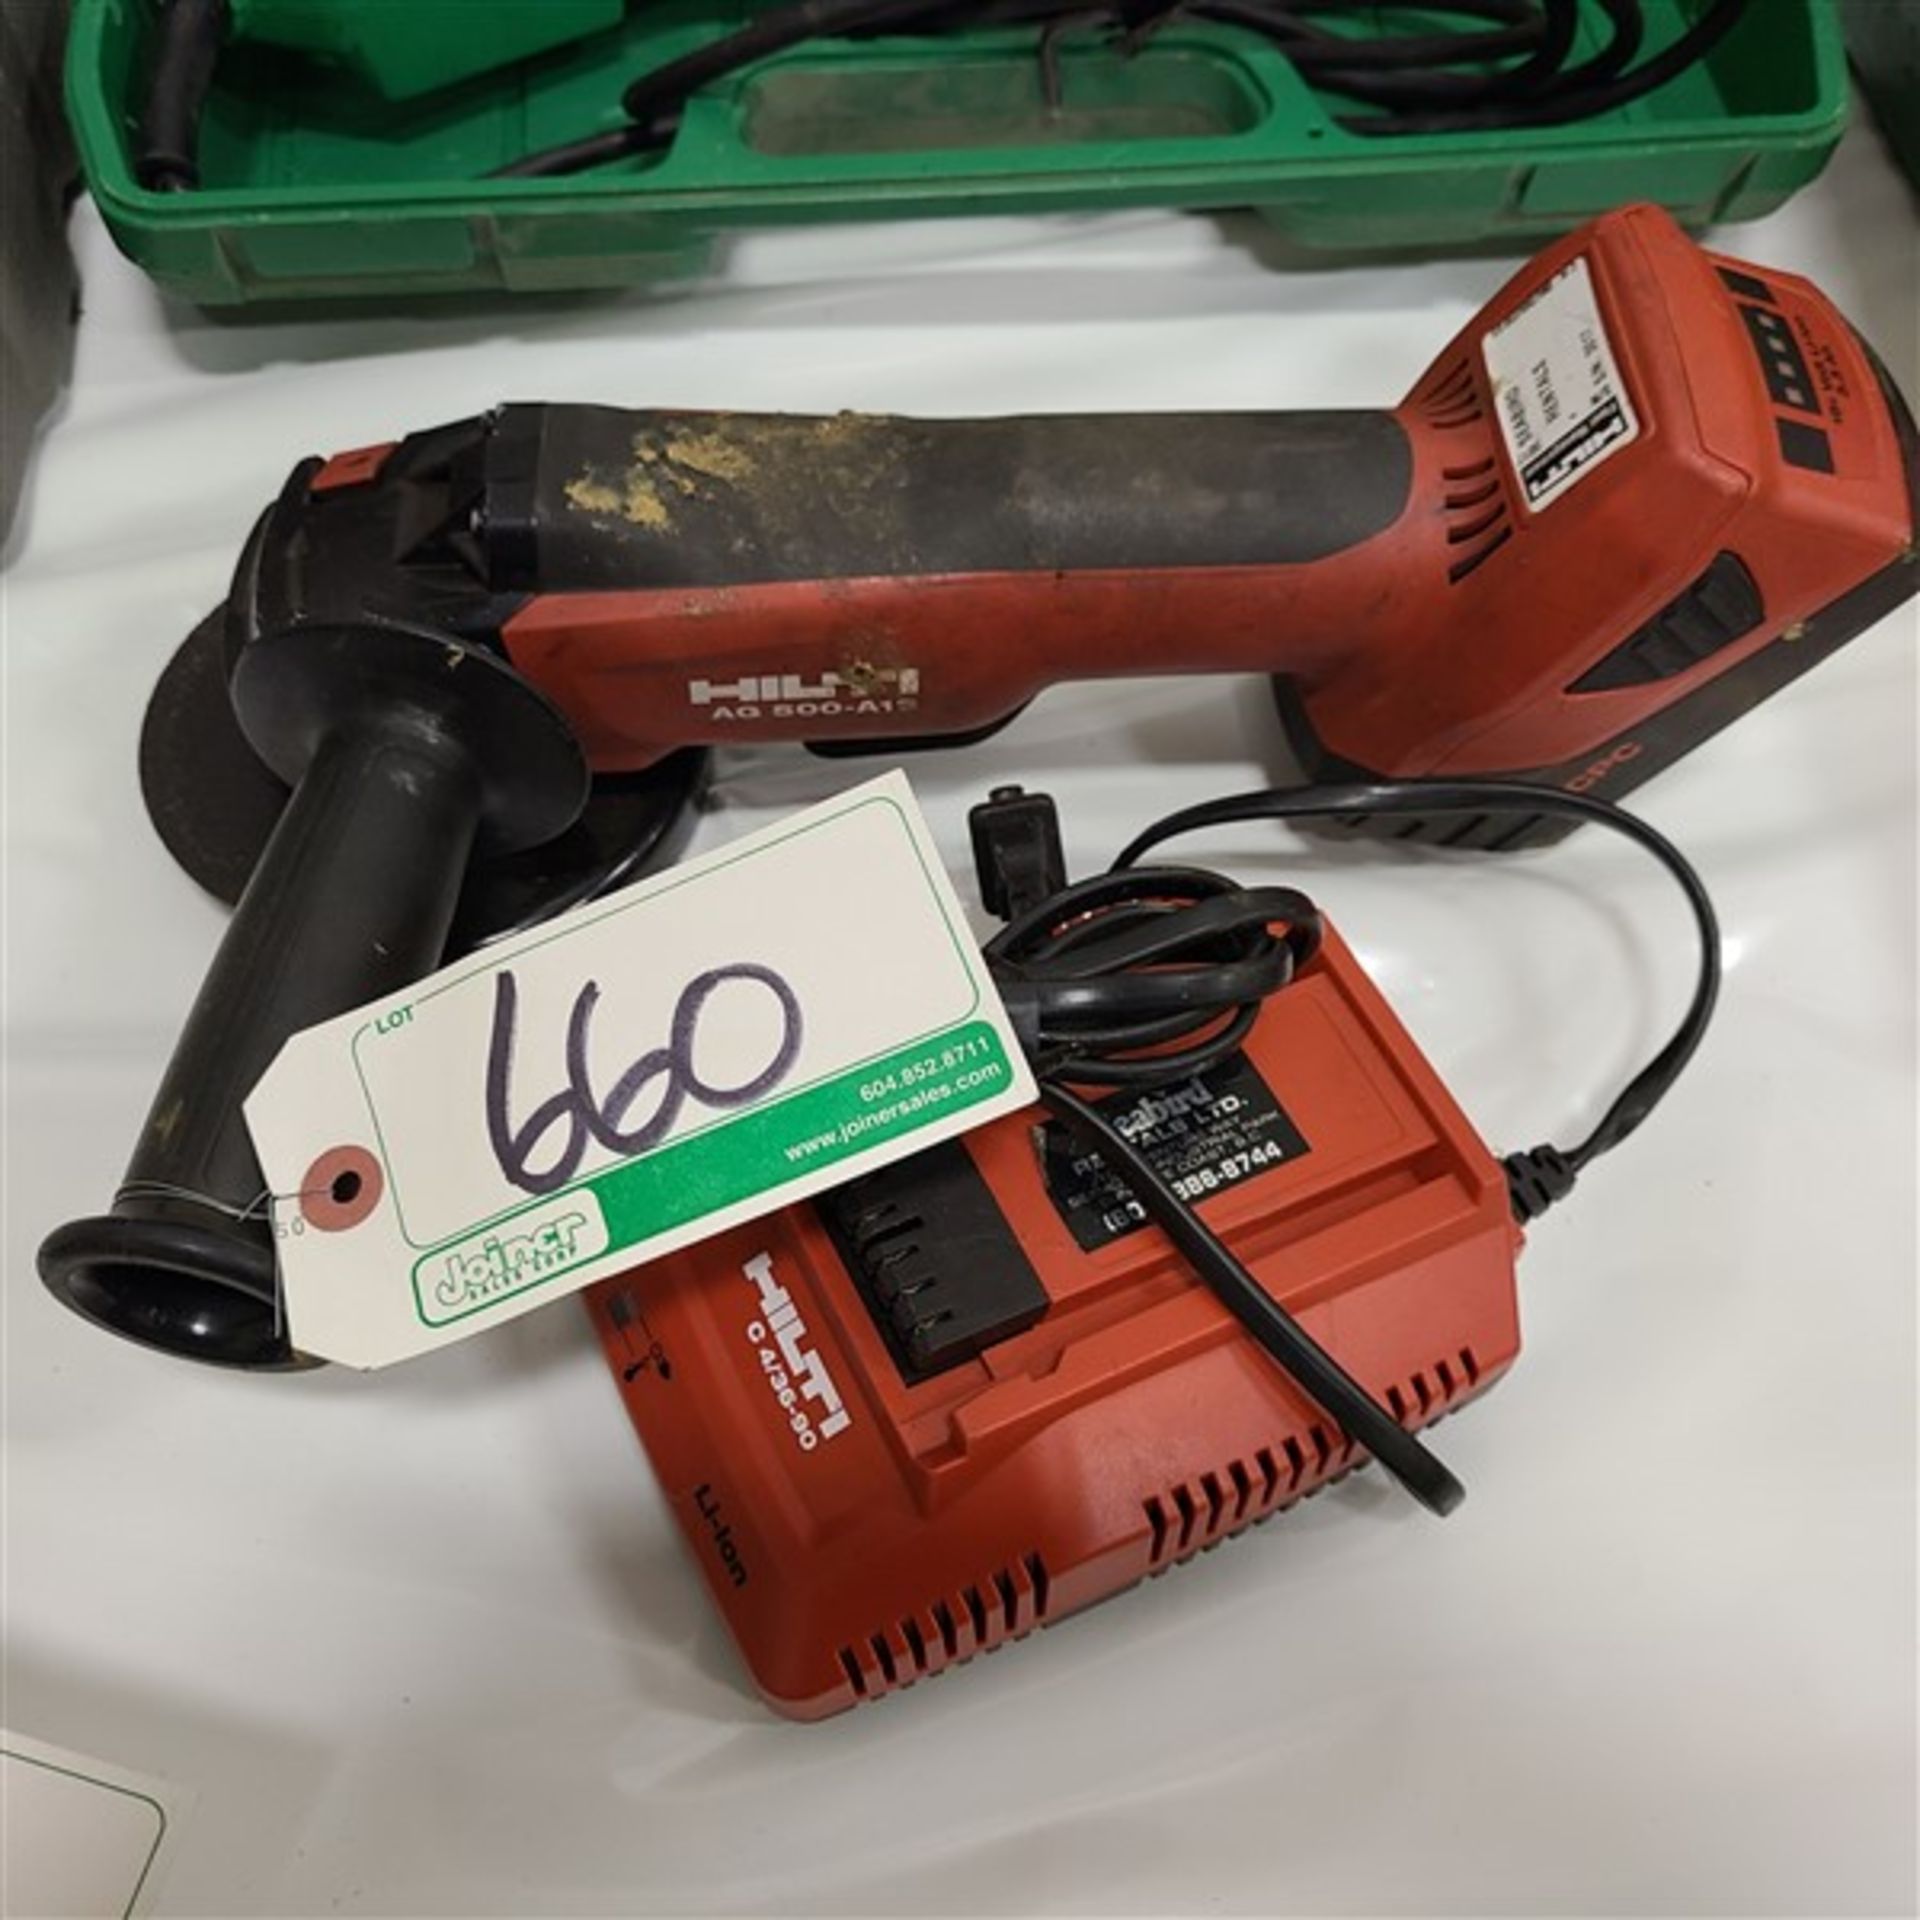 HILTI AG 500-A18 CORDLES 5 IN. ANGLE GRINDER